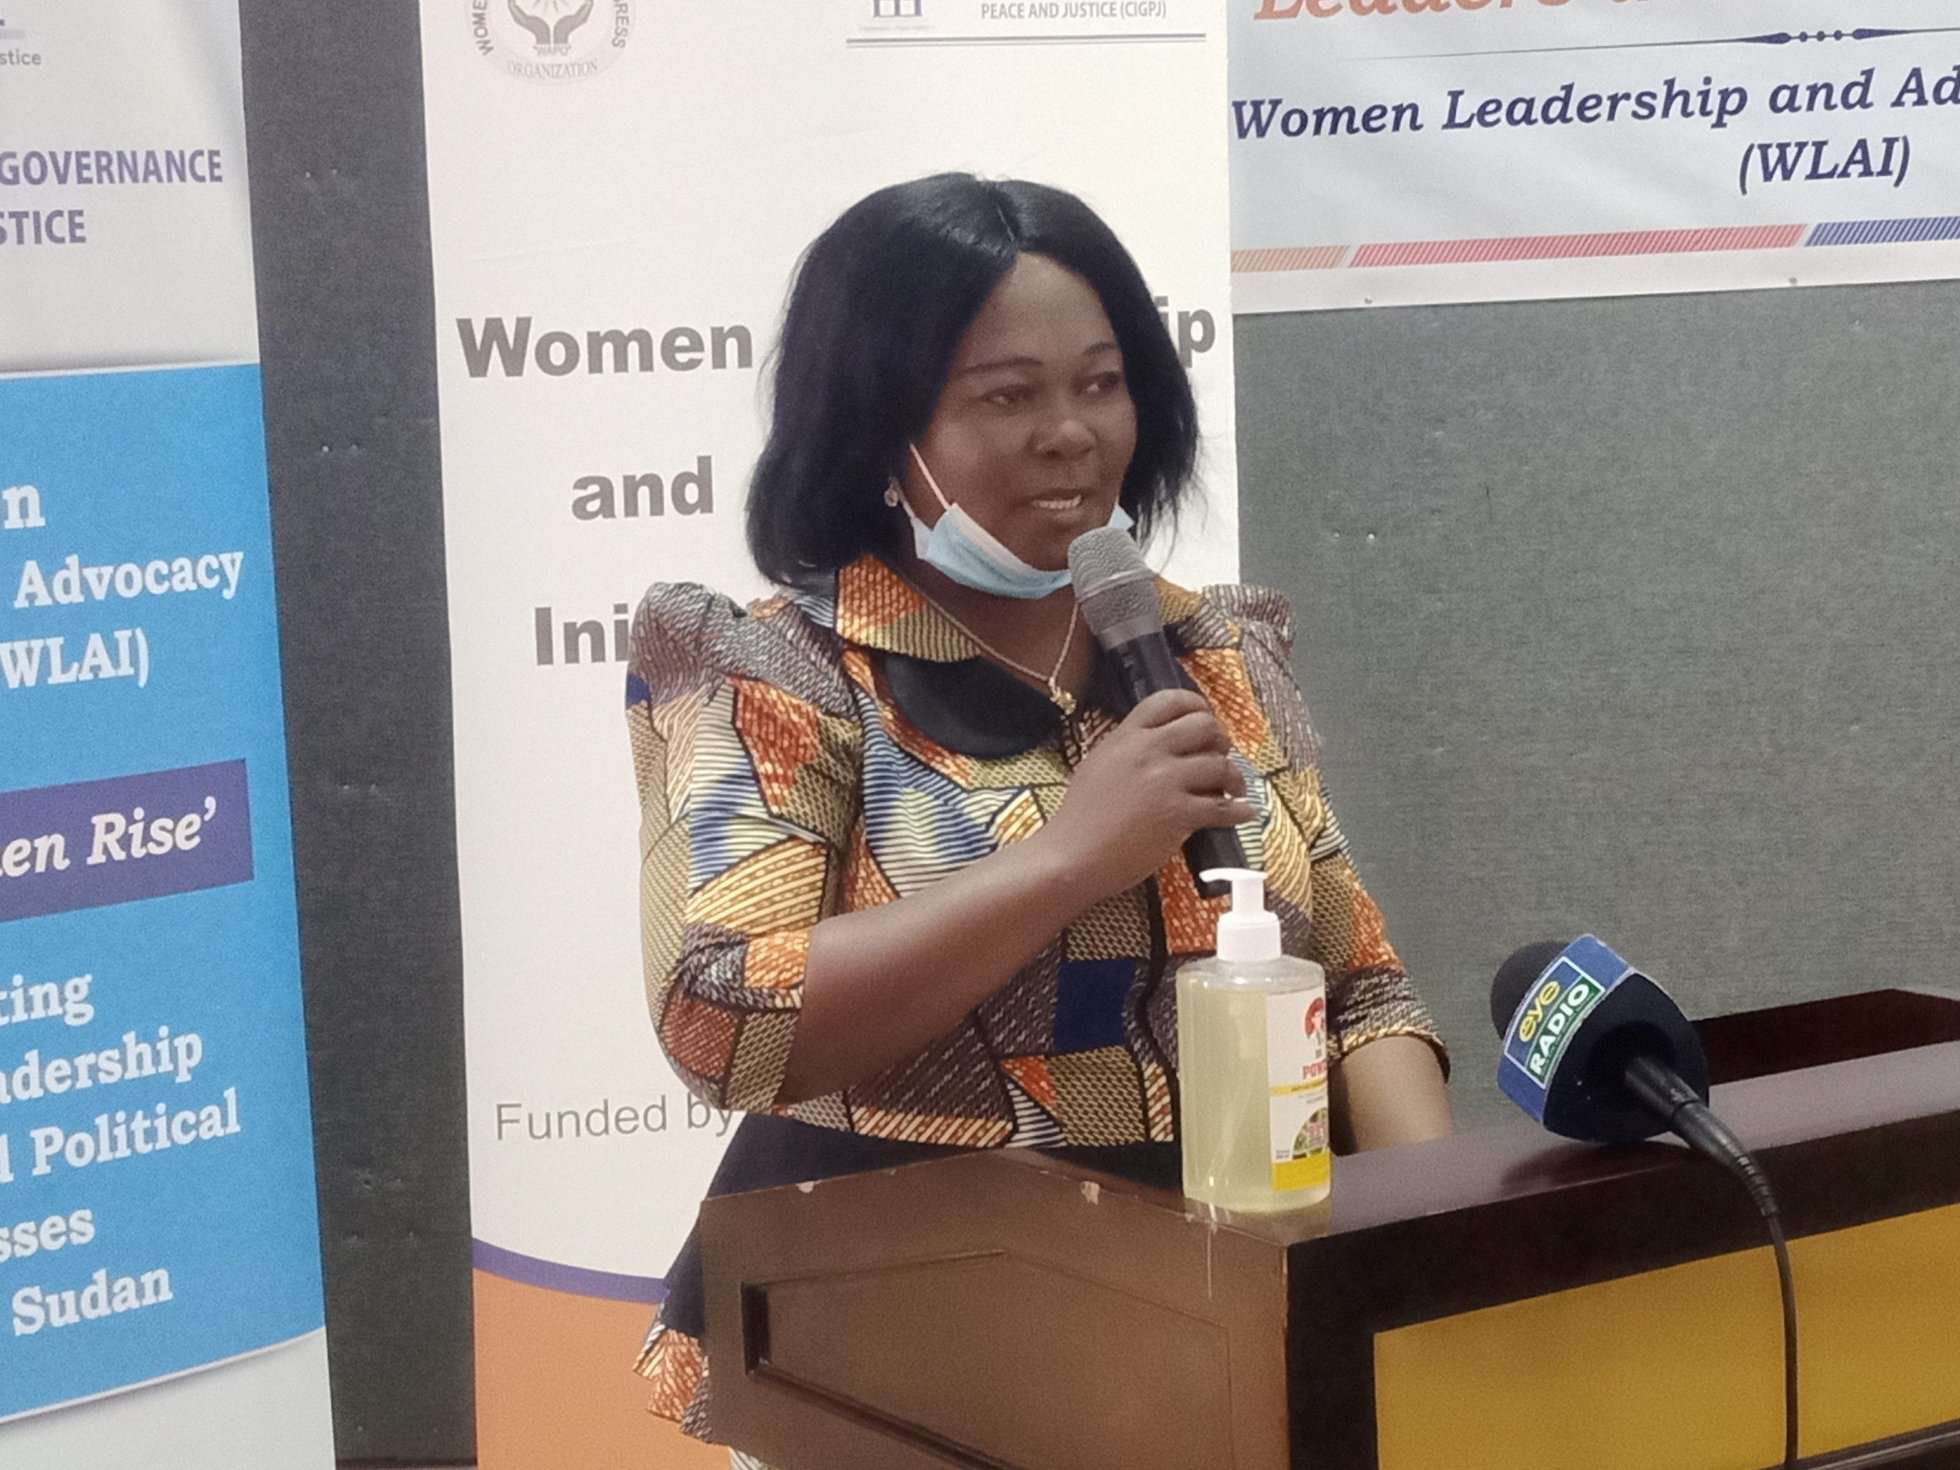 Women in leadership urged to fight corruption